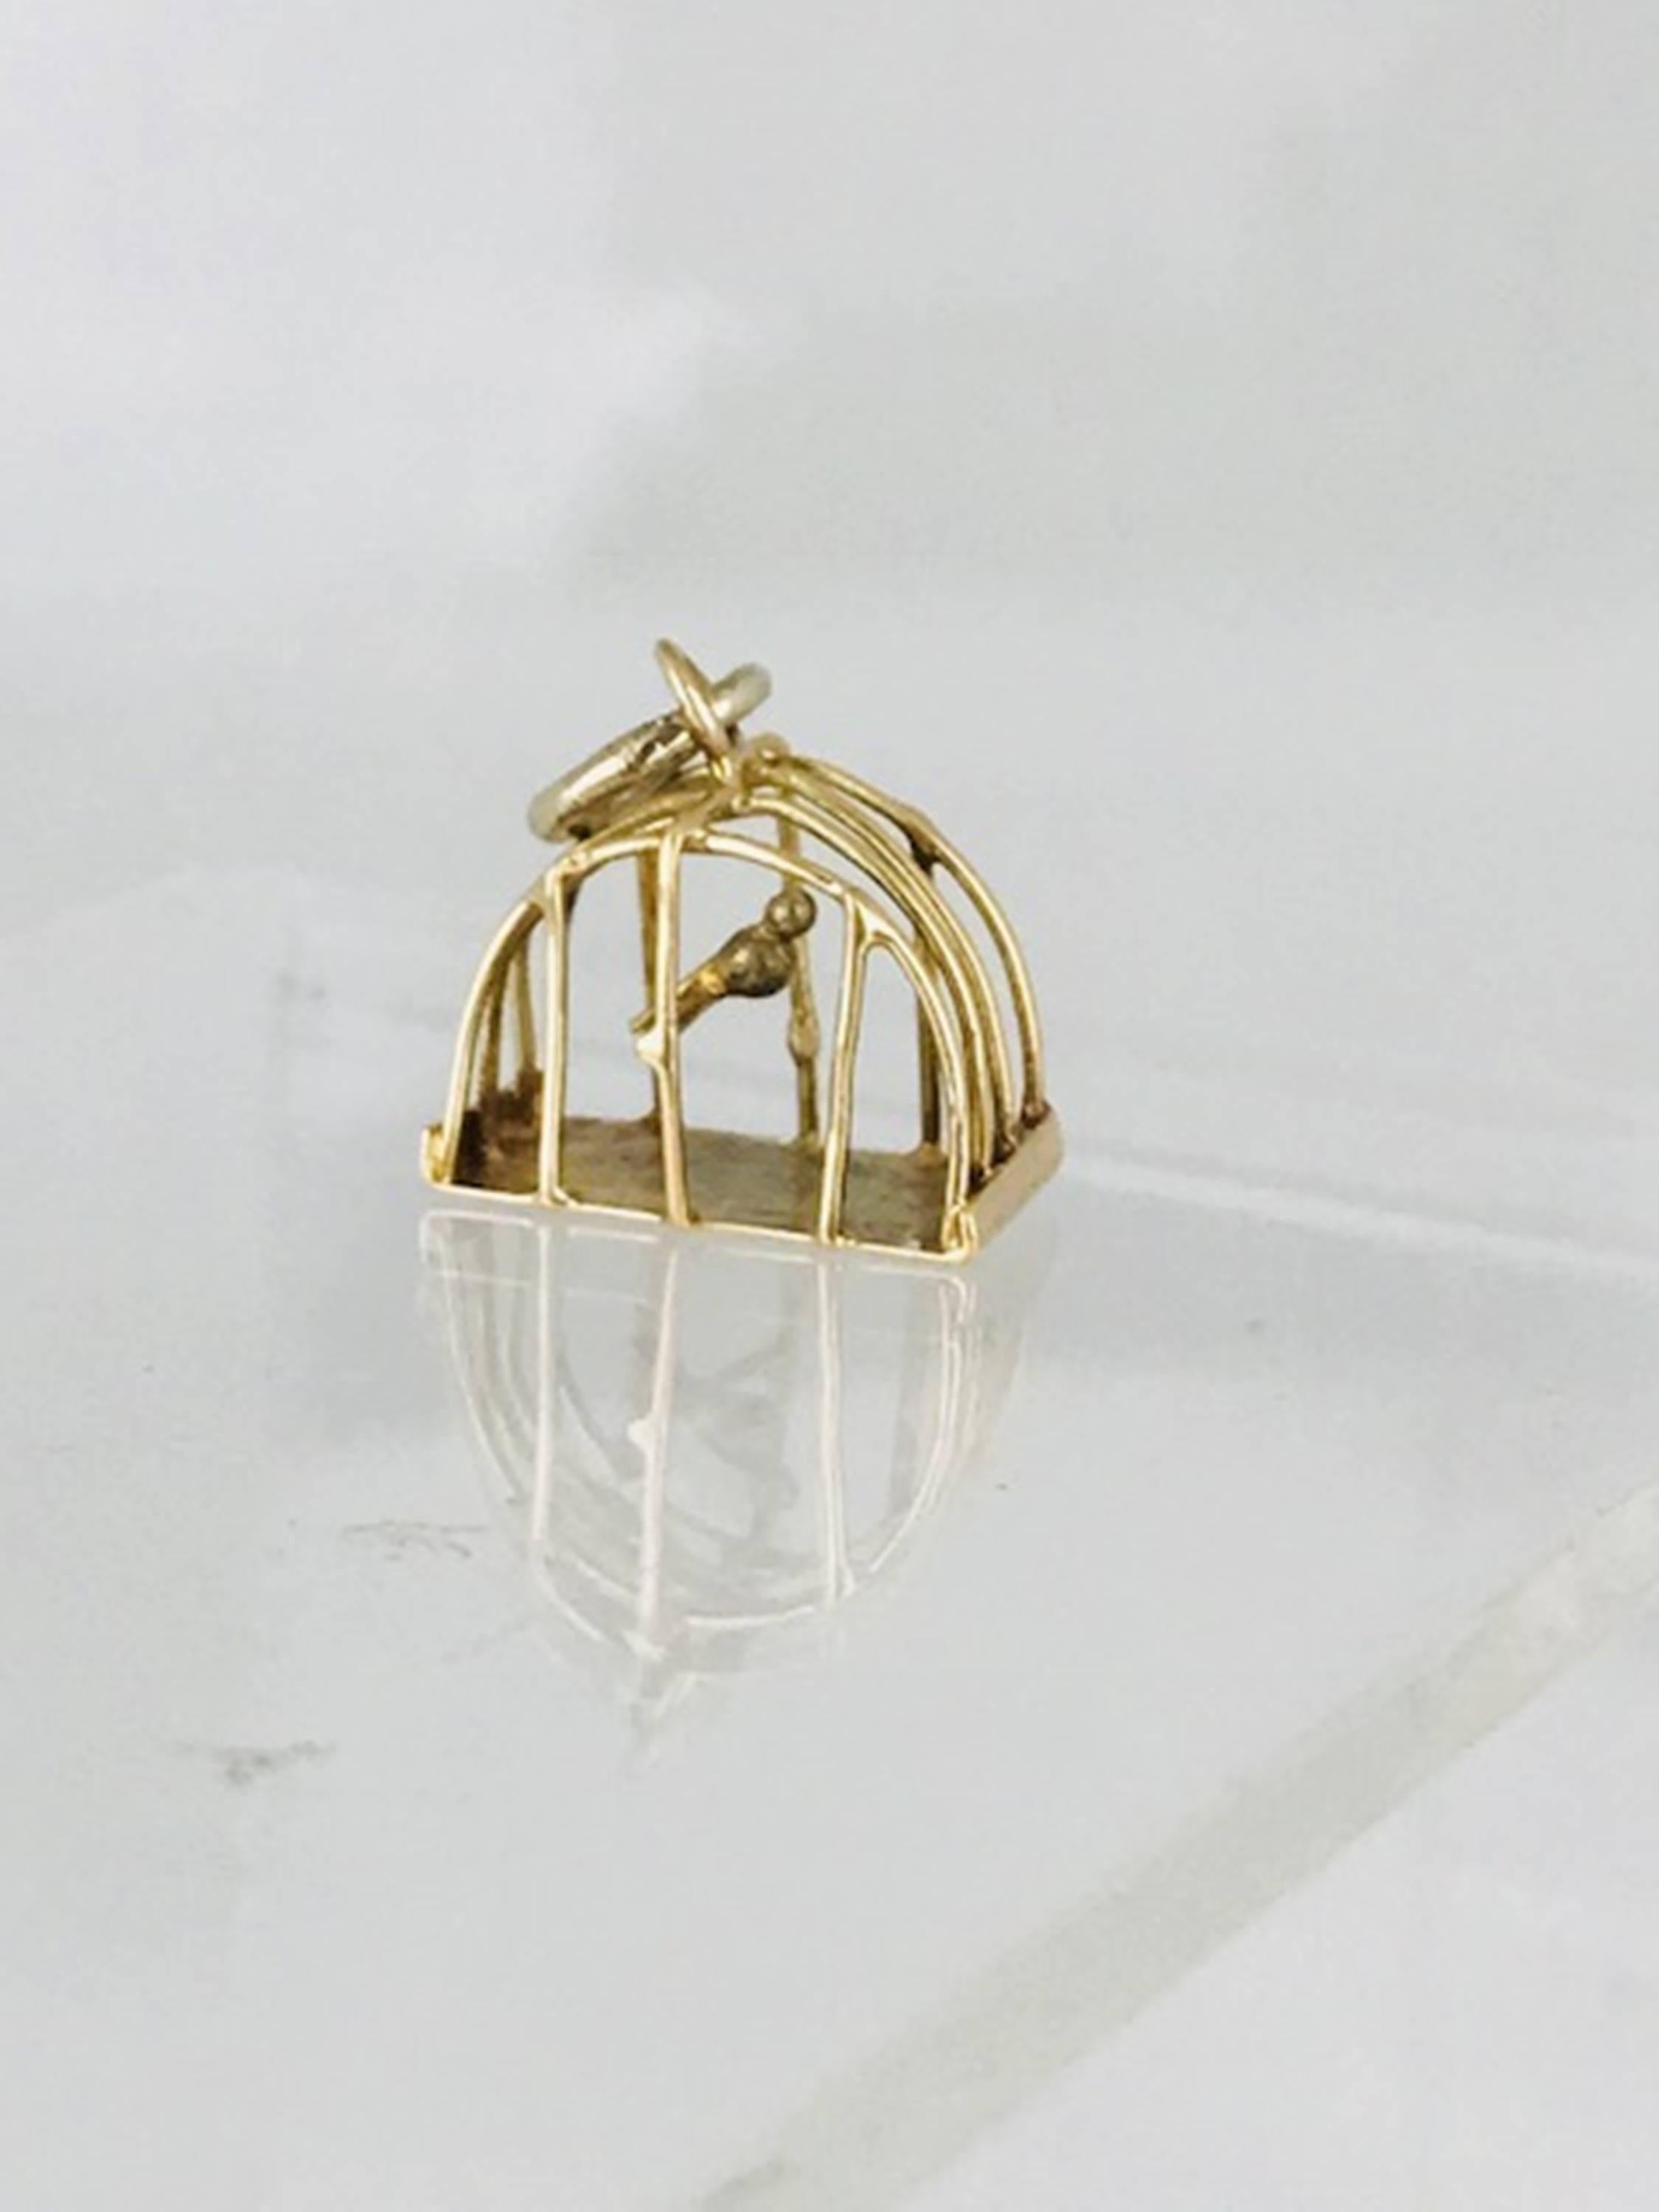 Women's or Men's Bird in a Cage Charm, Handmade, circa 1950, 14 Karat Yellow Gold For Sale